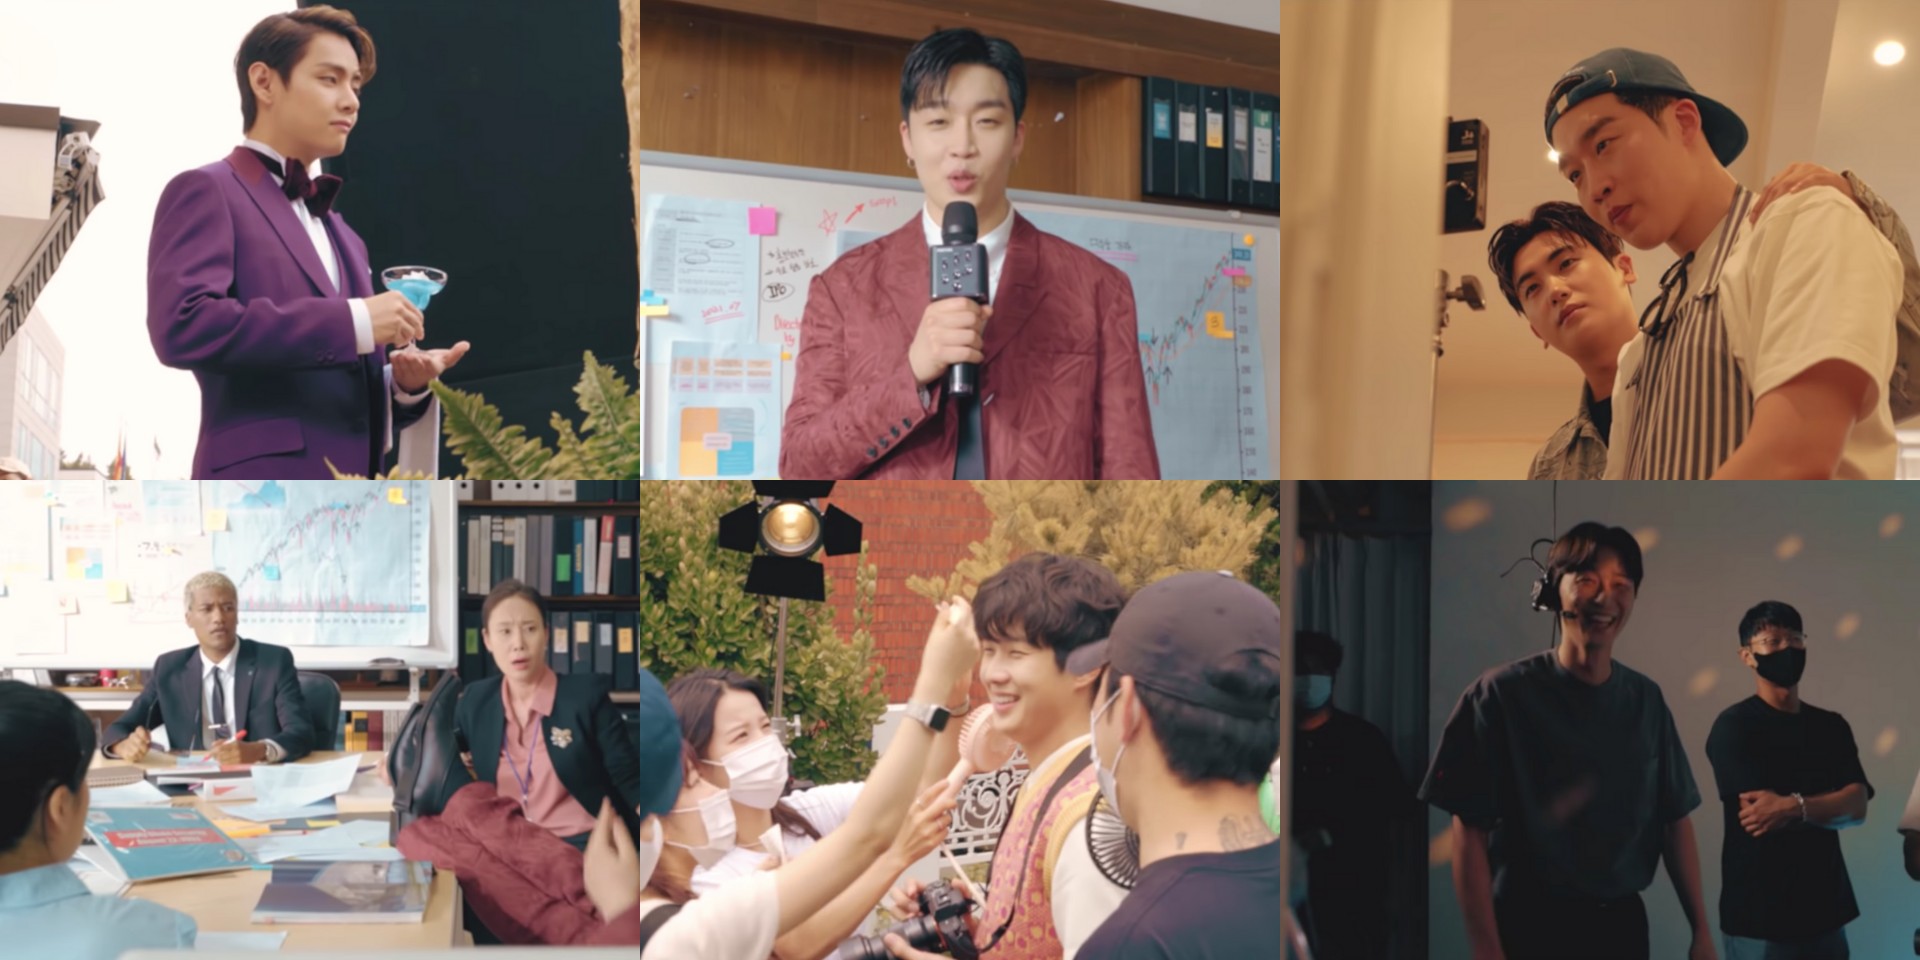 Go behind the scenes of Peakboy's 'Gyopo Hairstyle' music video featuring BTS' V, Park Seo Joon, Park Hyungsik, Choi Woo Shik, and more – watch